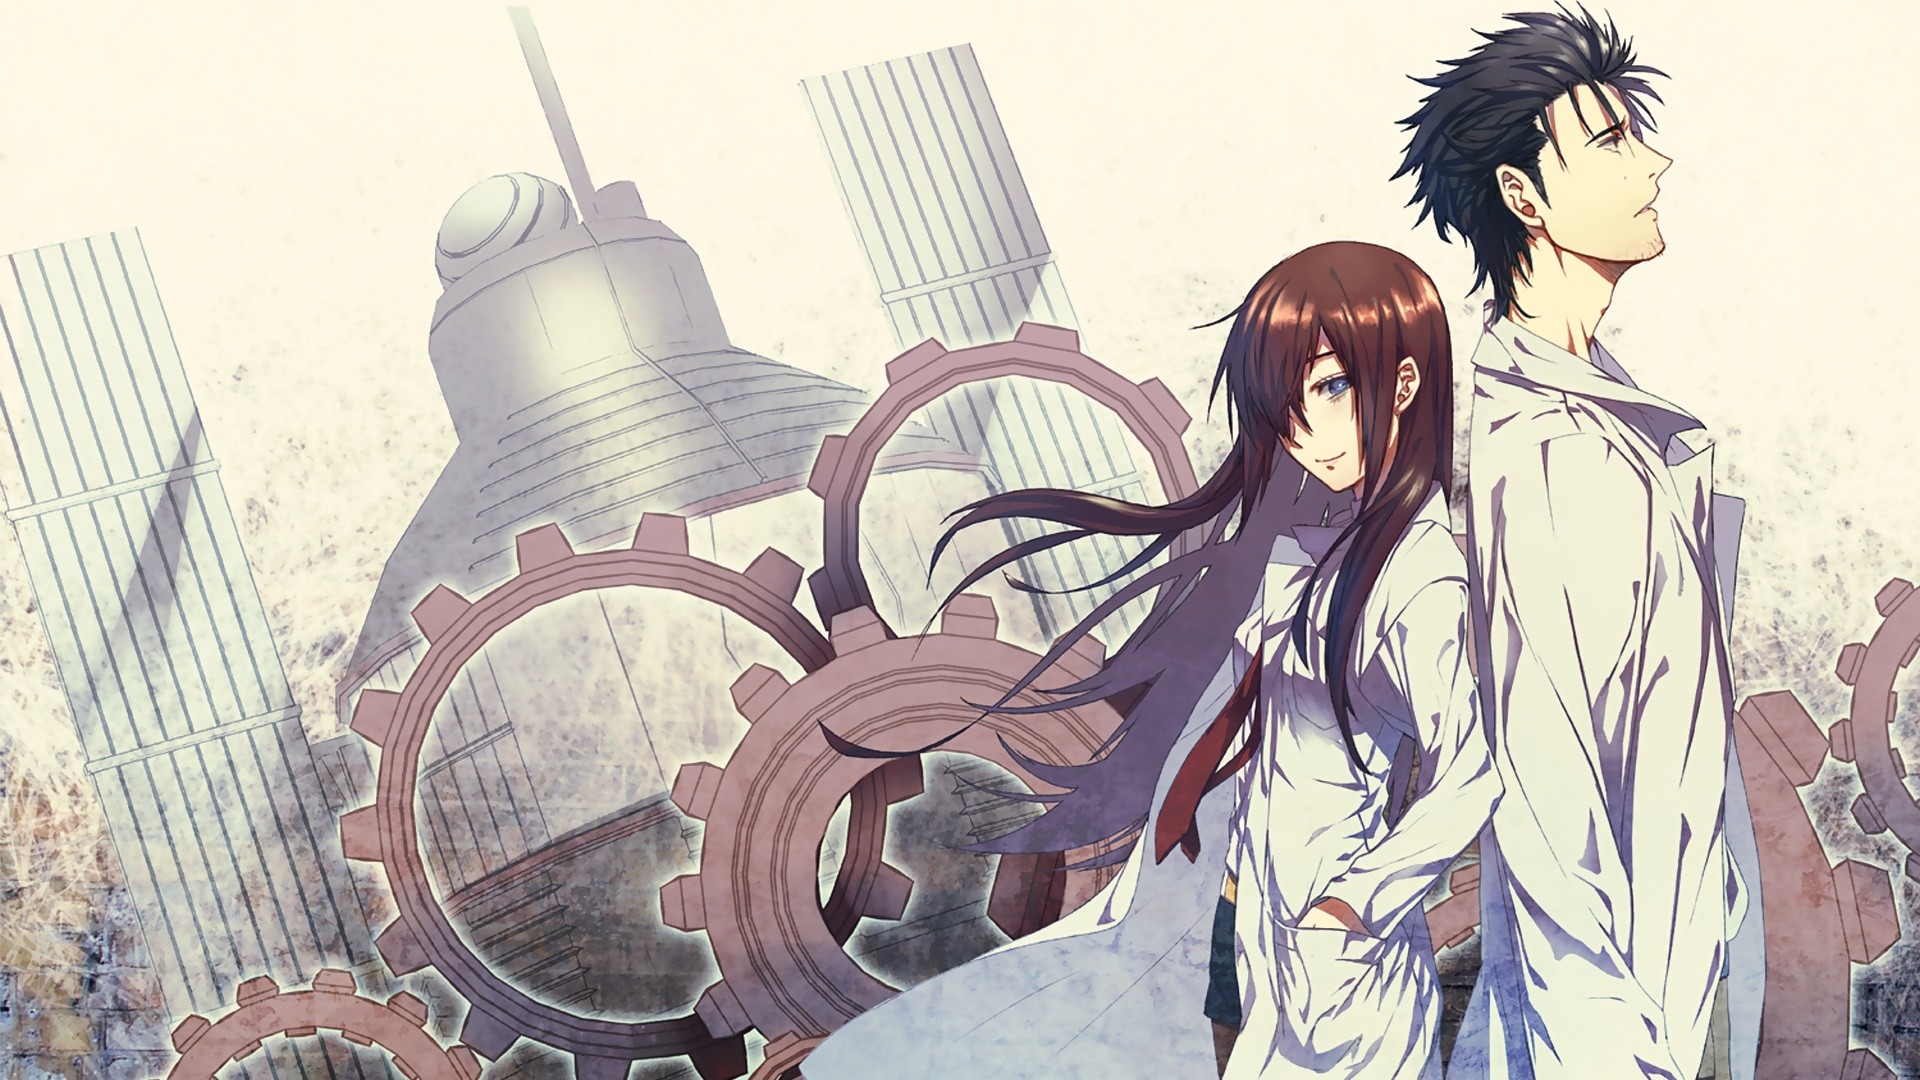 1920x1080 Steins Gate Full HD Wallpaper http://wallpapers-and-backgrounds.net